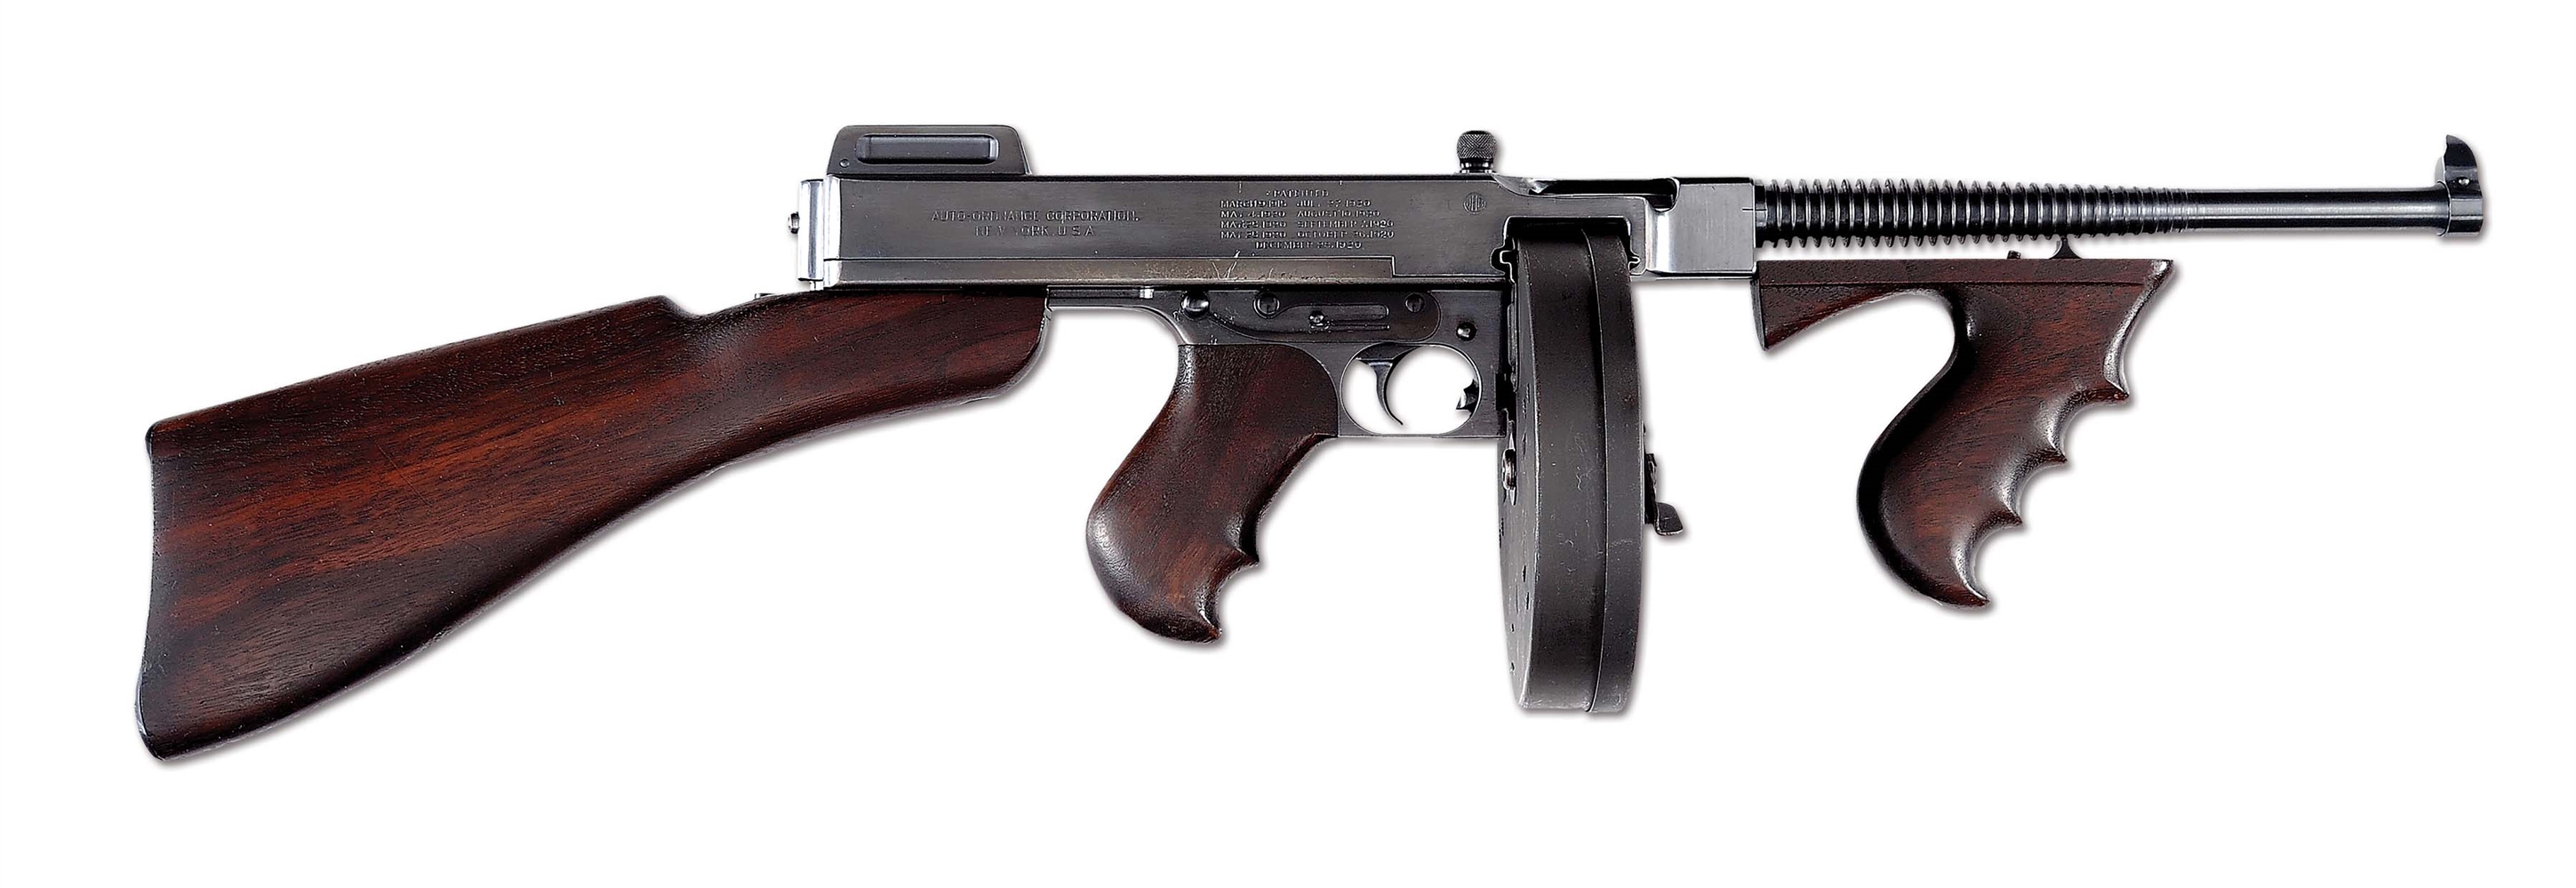 (N) OUTSTANDING CONDITION 1 OF 2 CONSECUTIVELY NUMBERED COLT 1921A THOMPSON MACHINE GUN (CURIO & RELIC).